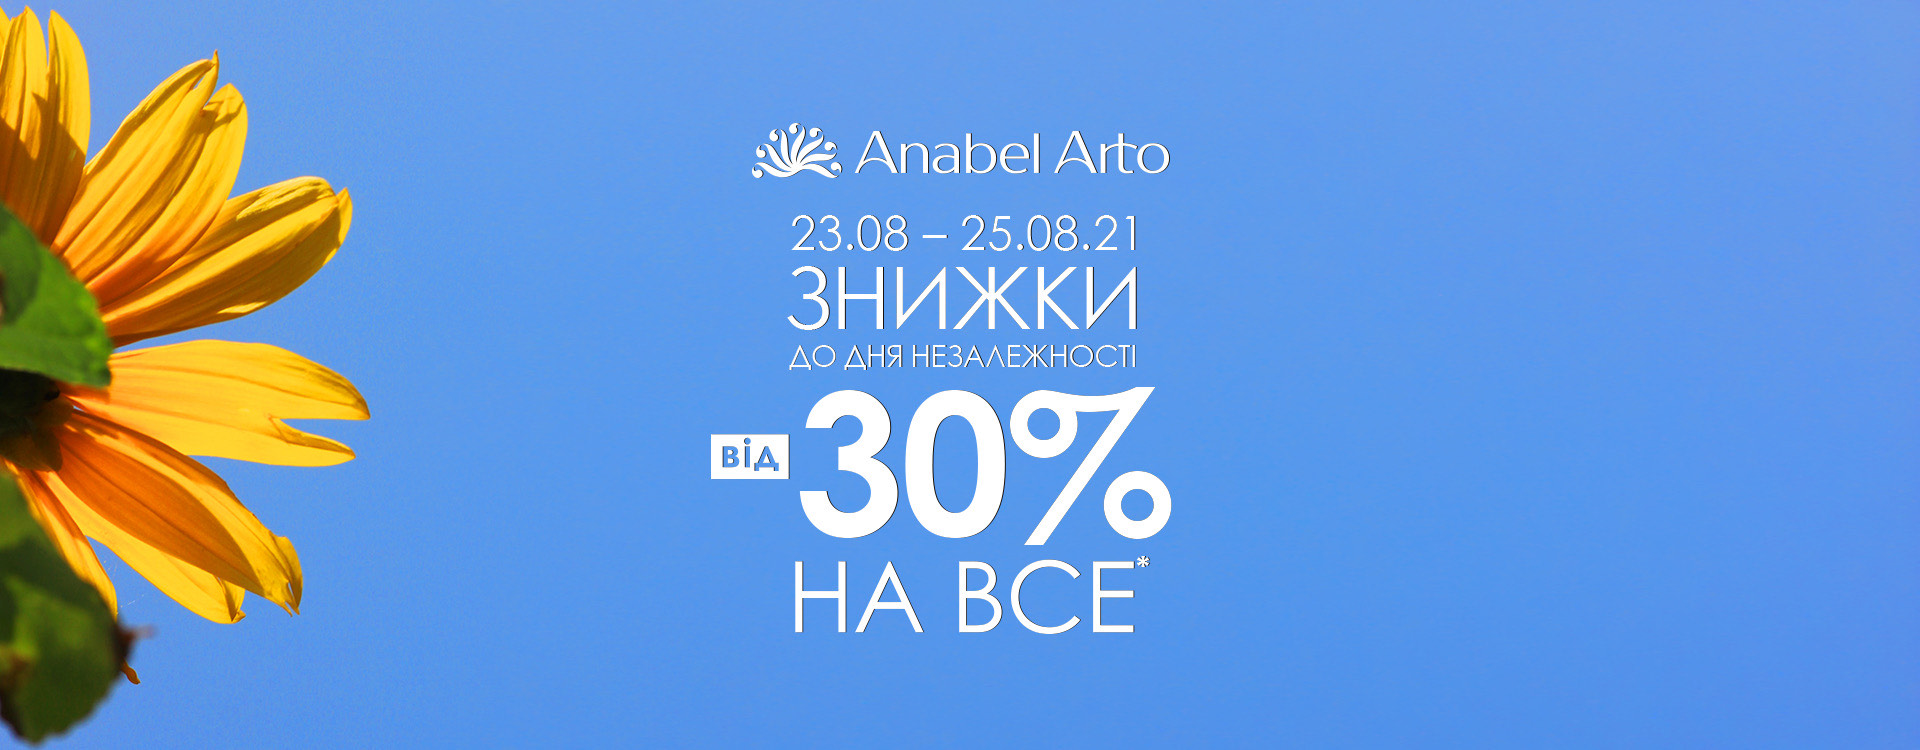 -30% to the 30th anniversary independence